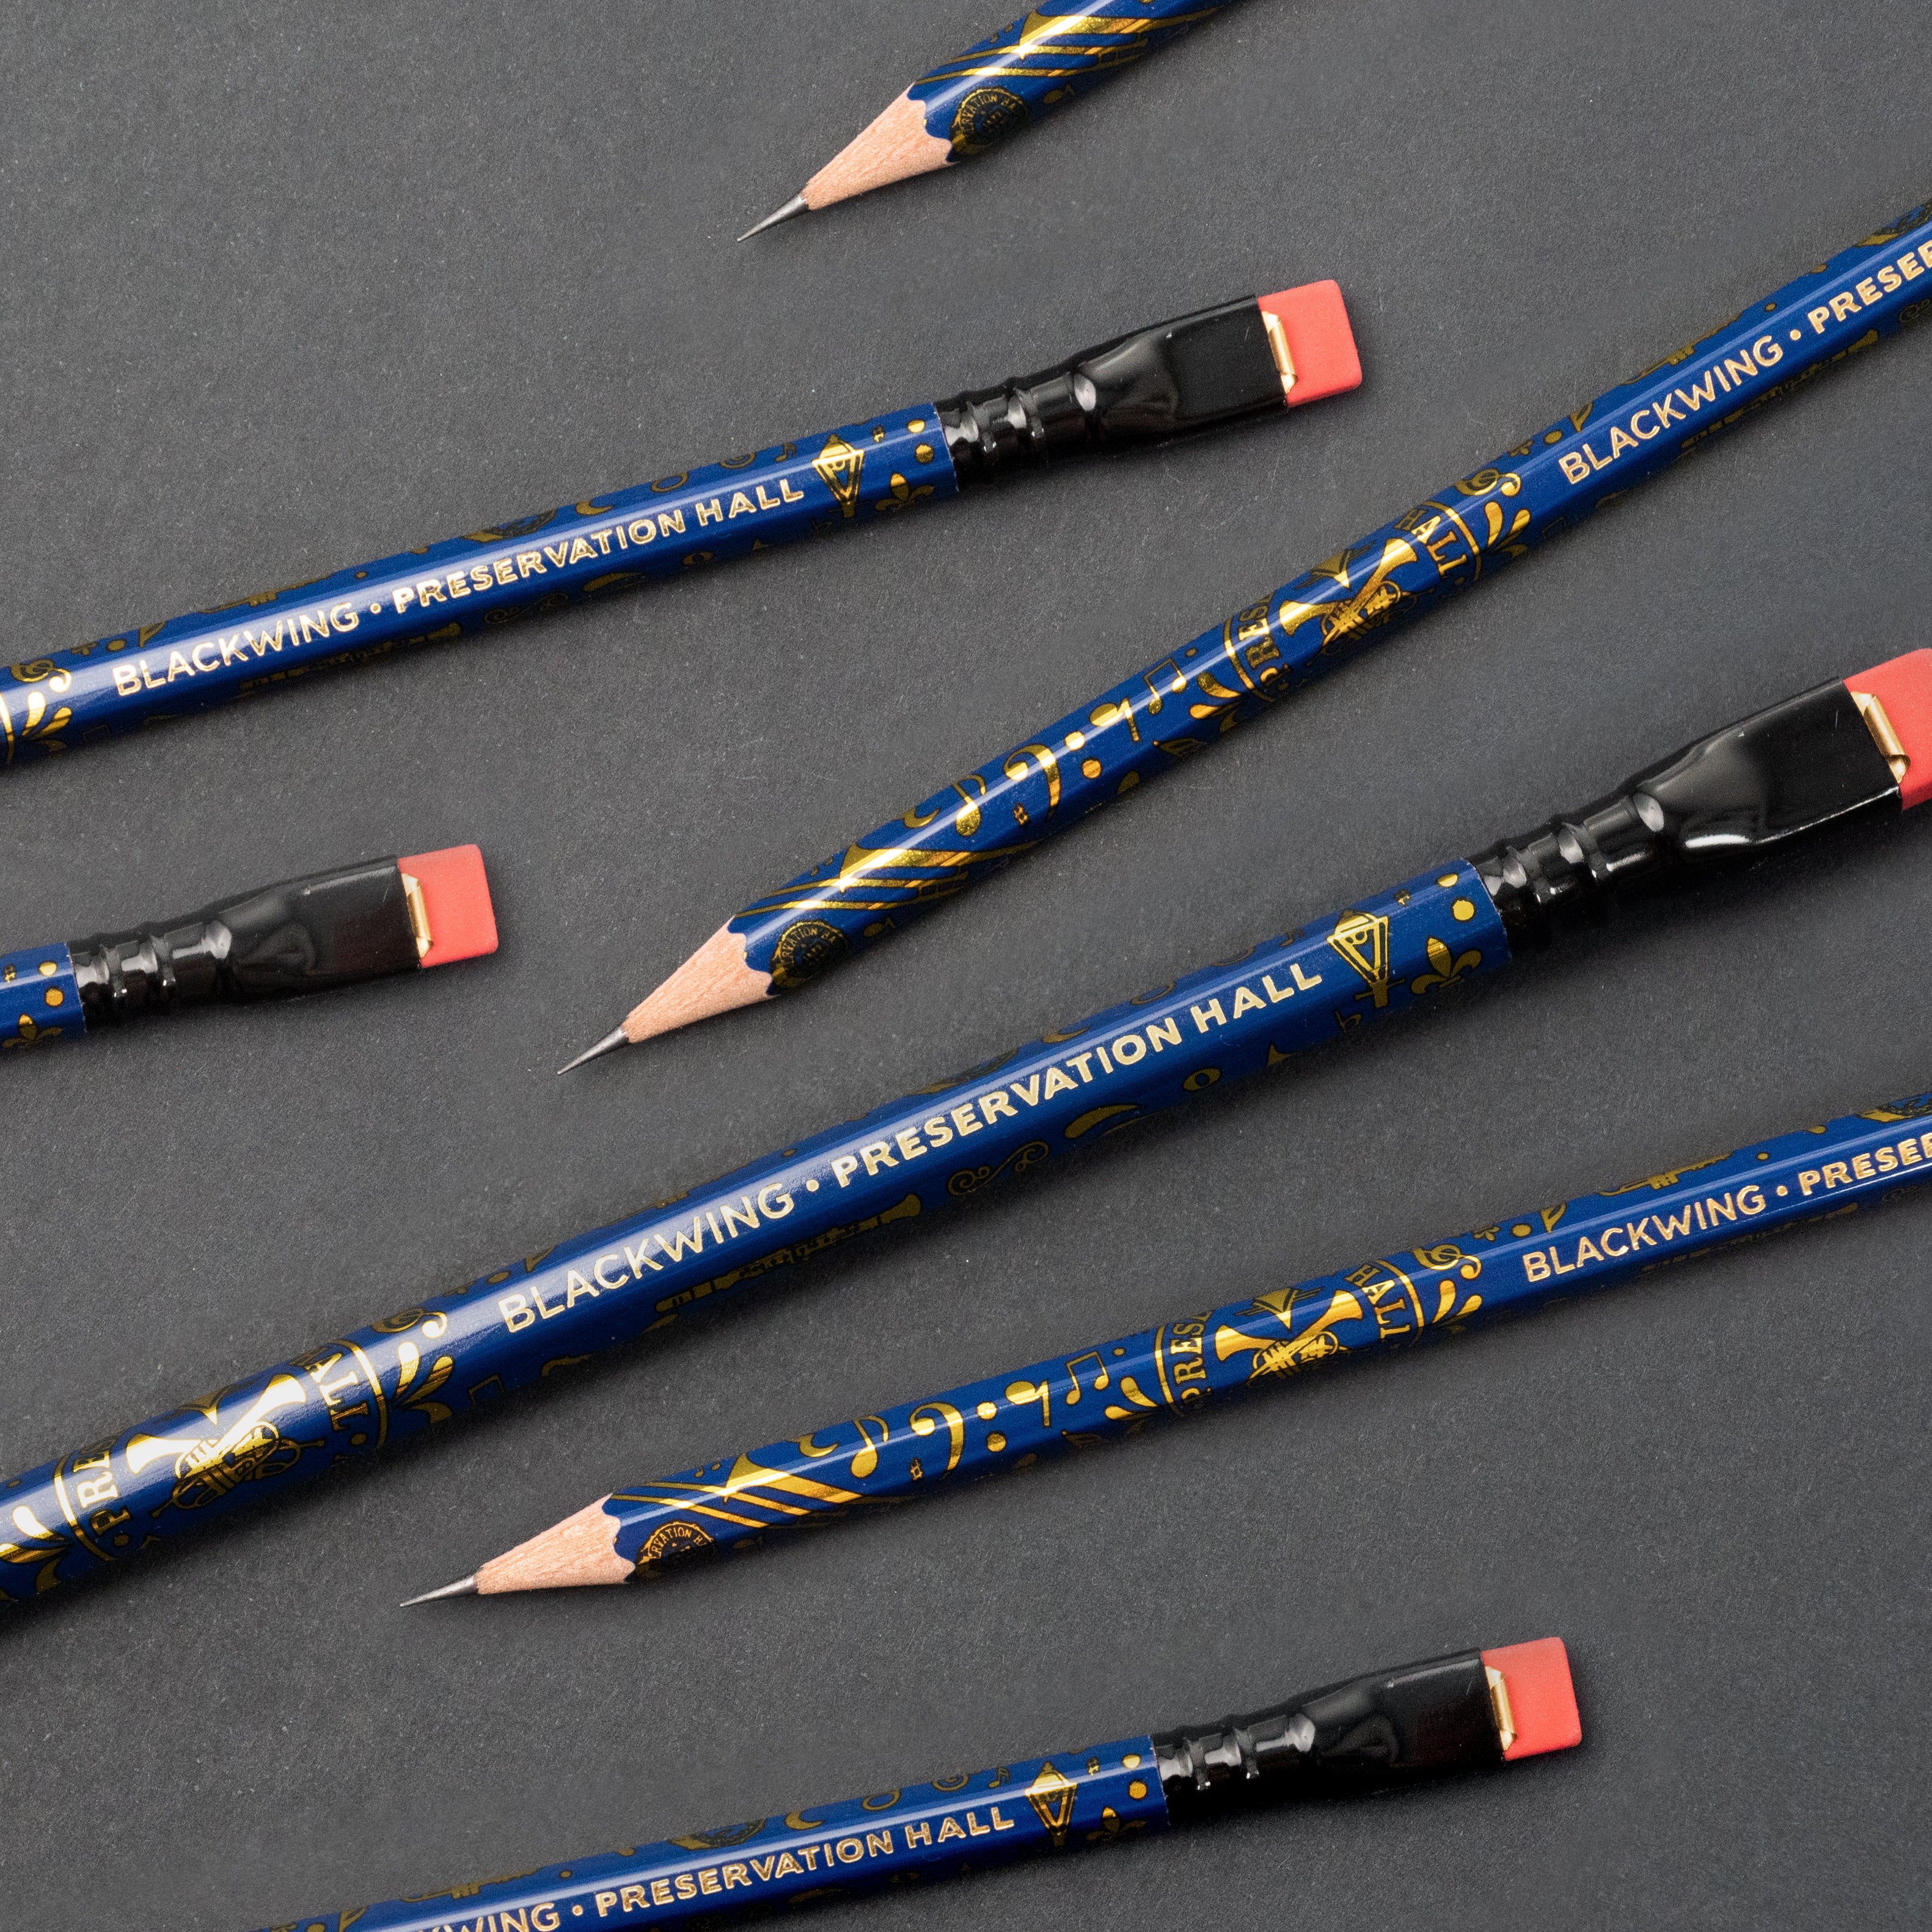 A stack of Blackwing X Preservation Hall (Set of 12) pencils resting on one another.